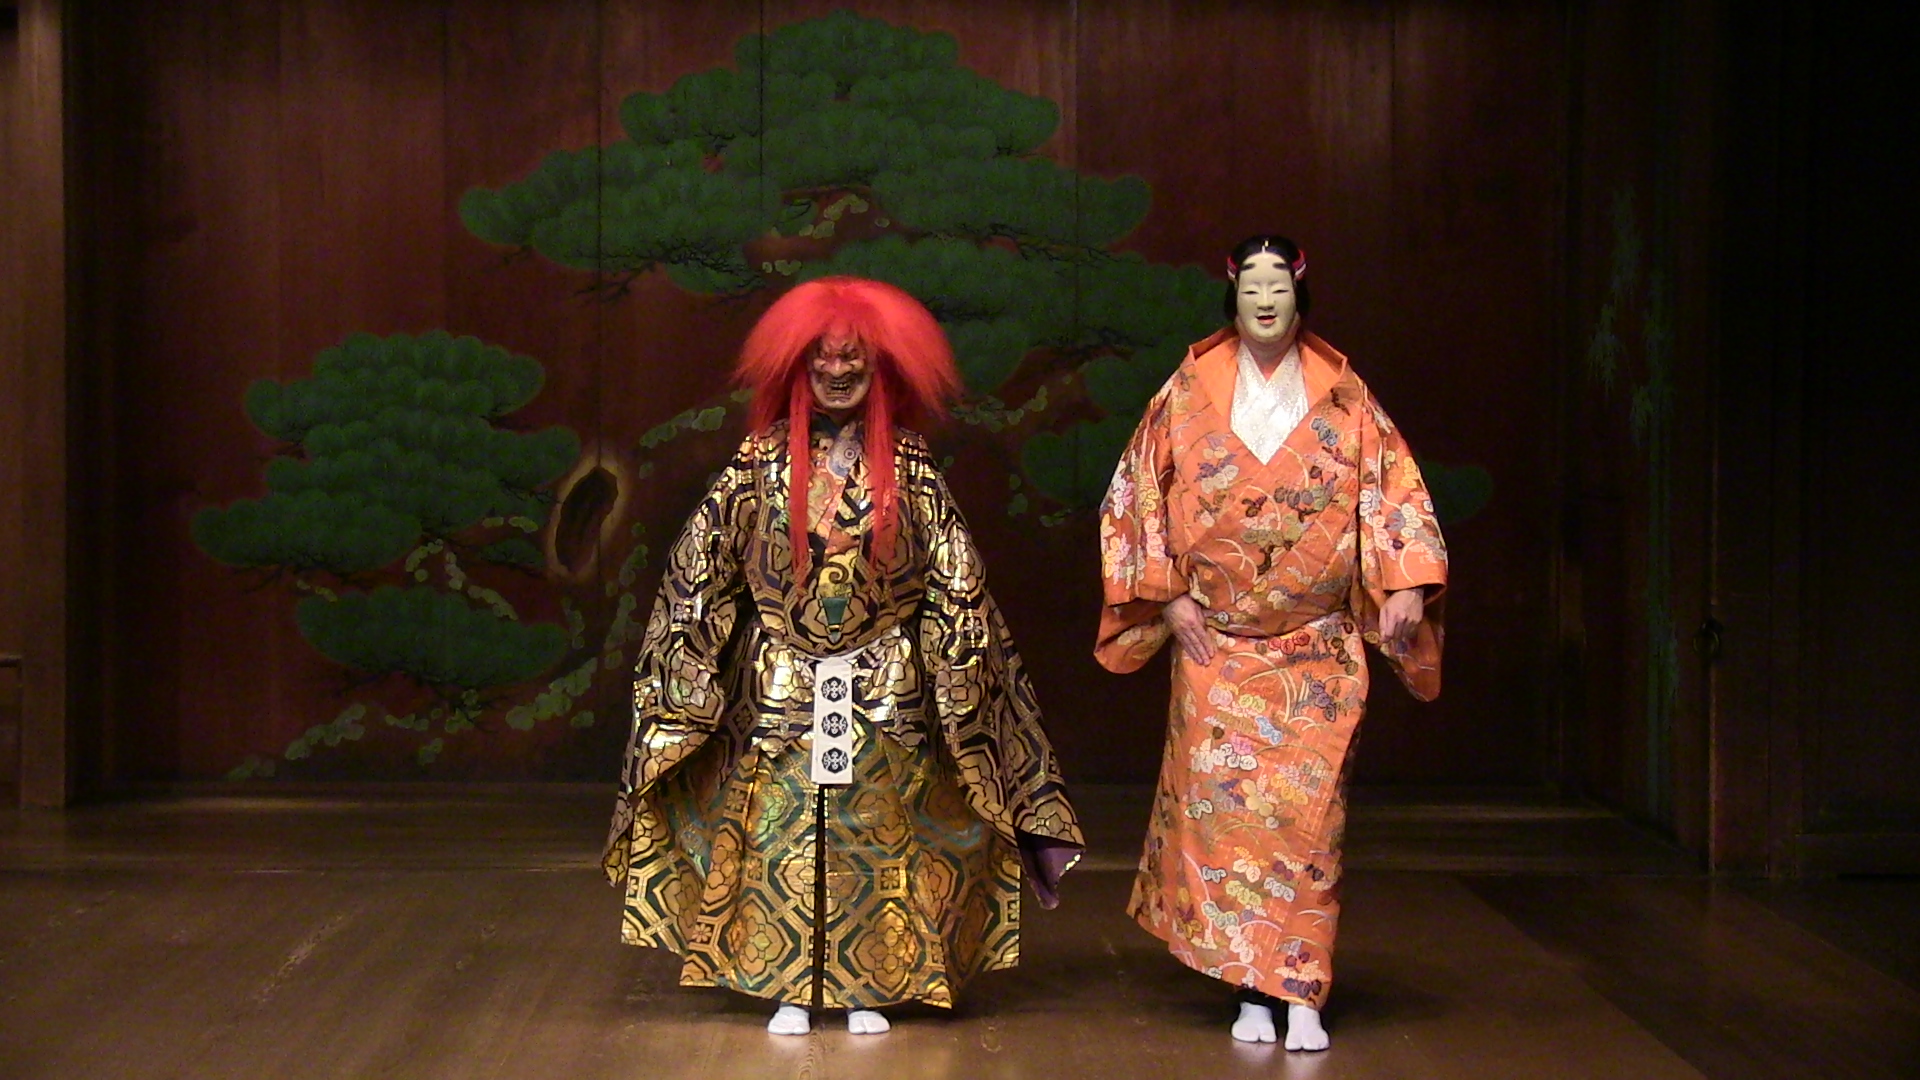 A scene from a play: In the centre of the stage two actors wearing colorful kimonos and Japanese masks